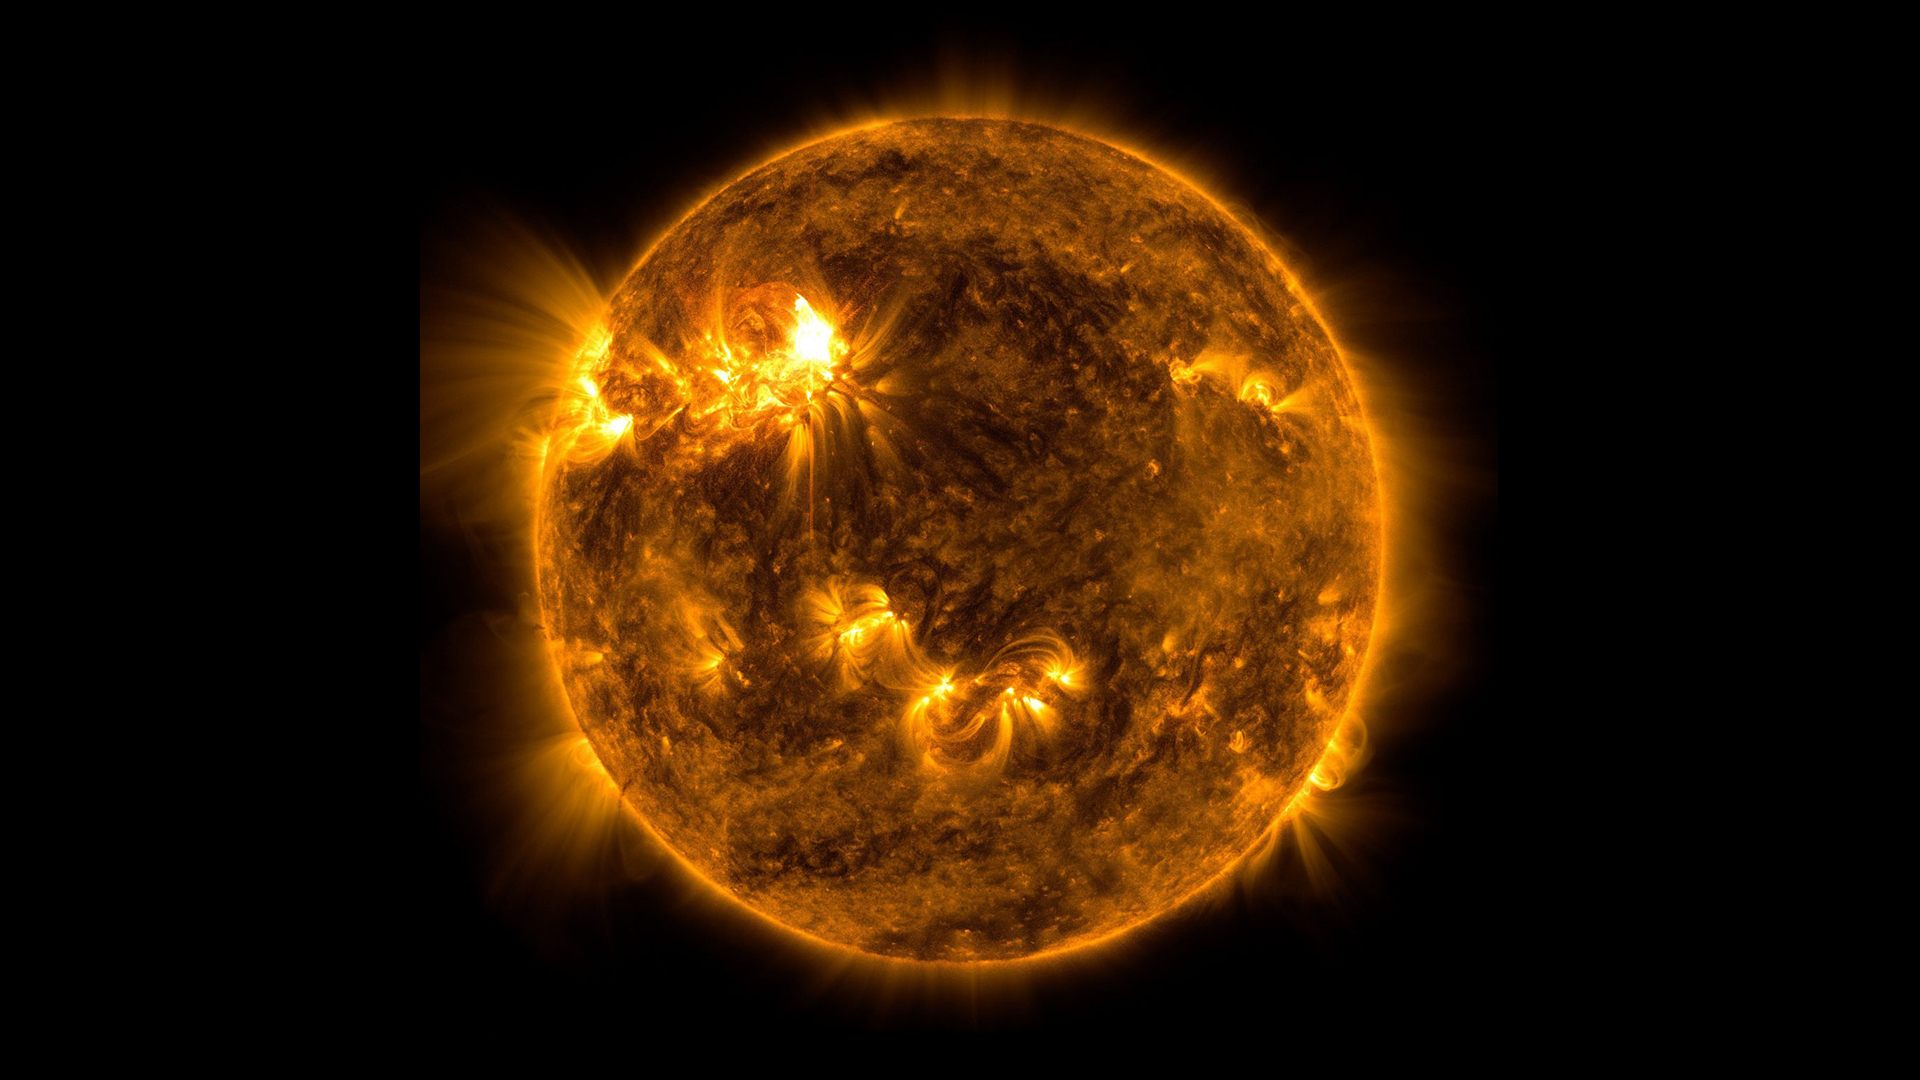 NASA’s Solar Dynamics Observatory captured this image of a solar flare – as seen in the bright flash in the upper left portion of the image– on April 20, 2022. The image shows a subset of extreme ultraviolet light that highlights the extremely hot material in flares, and which is colorized in yellow.